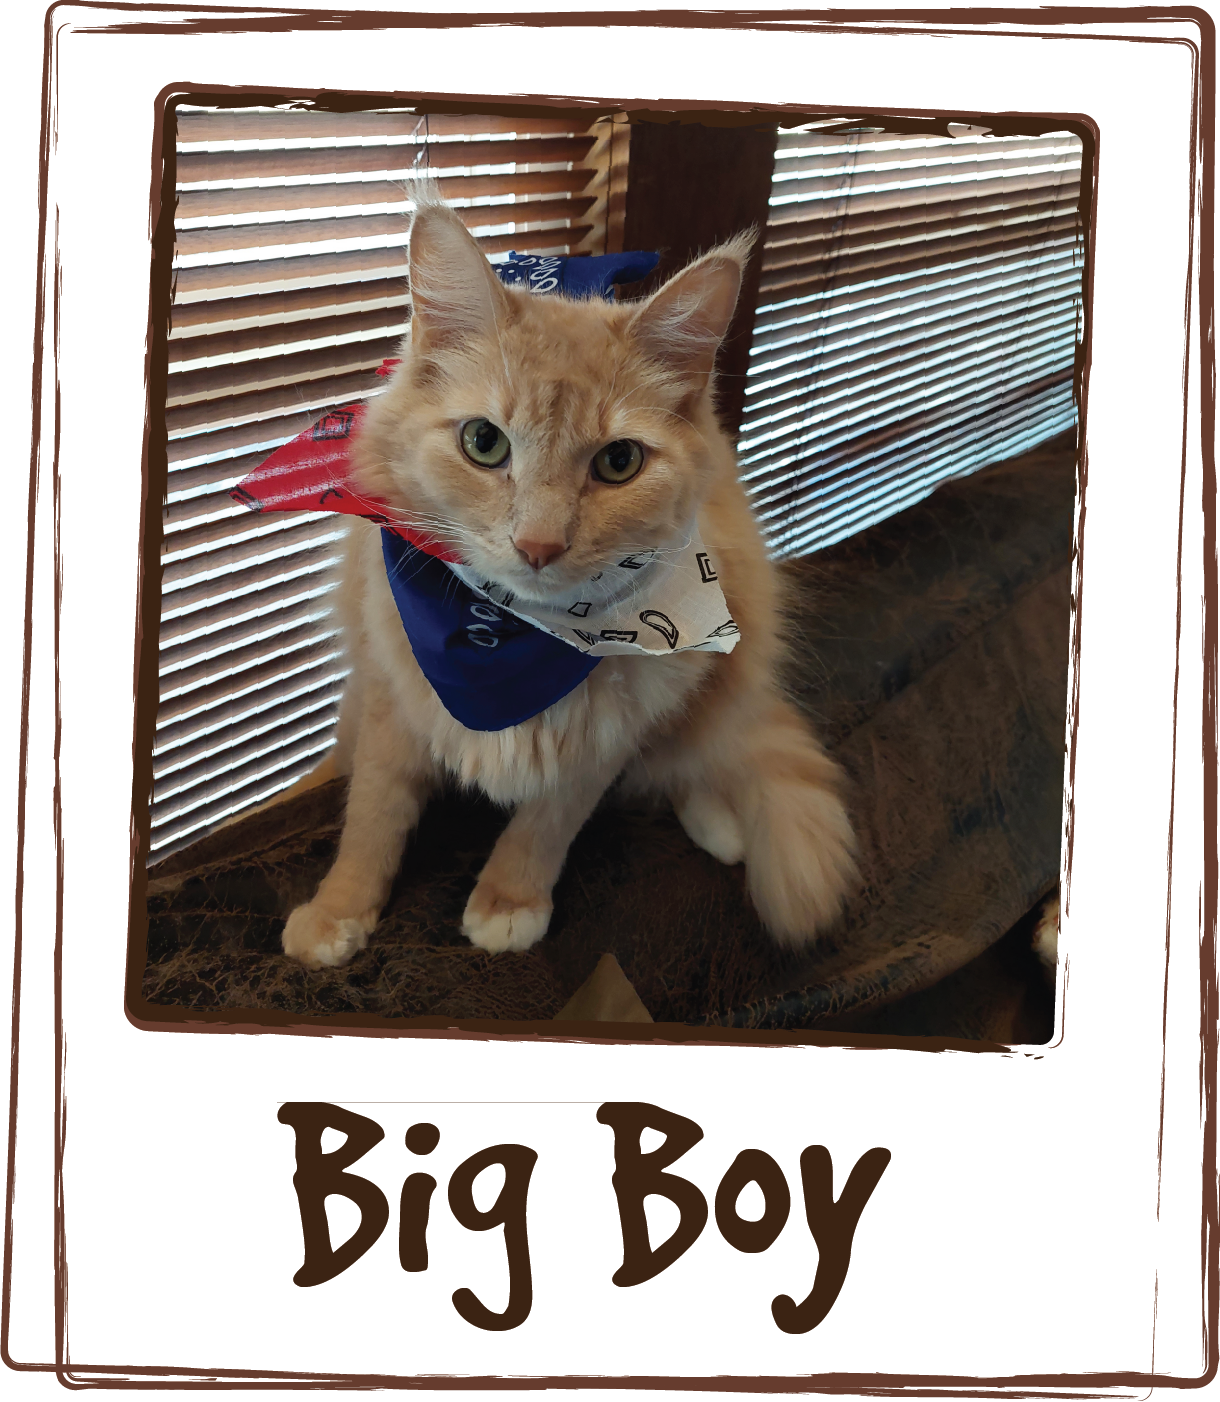  “My cat Big Boy, was having trouble going #1. He didn't feel good at all, going potty outside his litter box, getting sick. I did take him to the vet. The gave him some meds, said I would have to change his diet. I went to one of my pet store that c